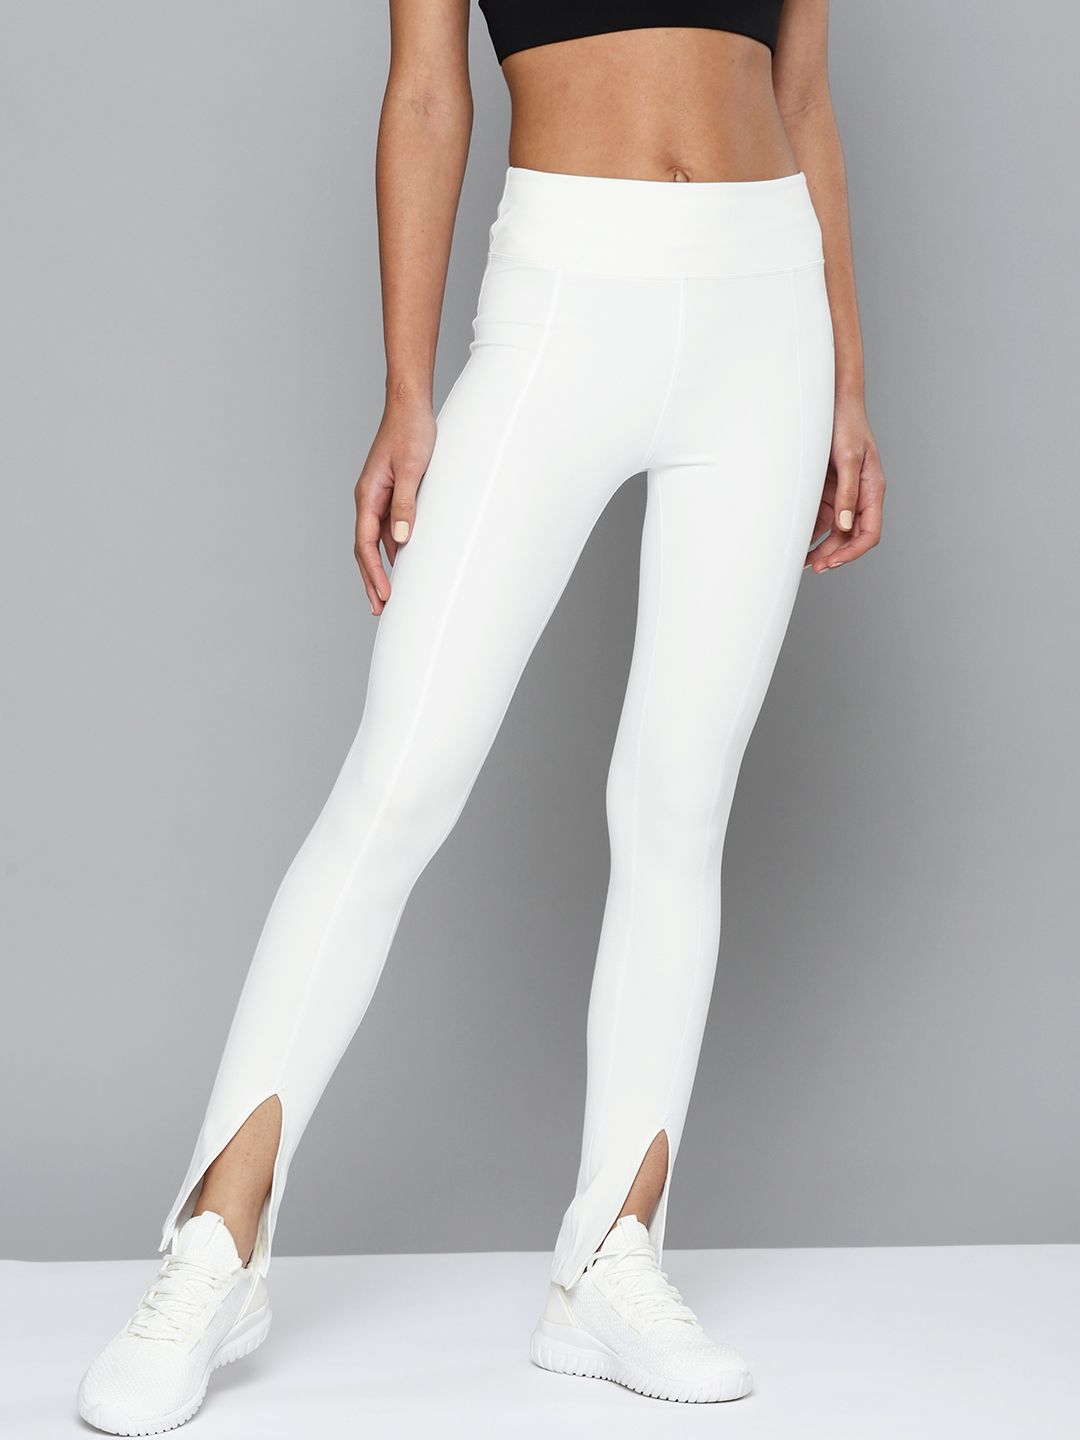 Fitkin Women White Front Slit Pintuck Tights Price in India